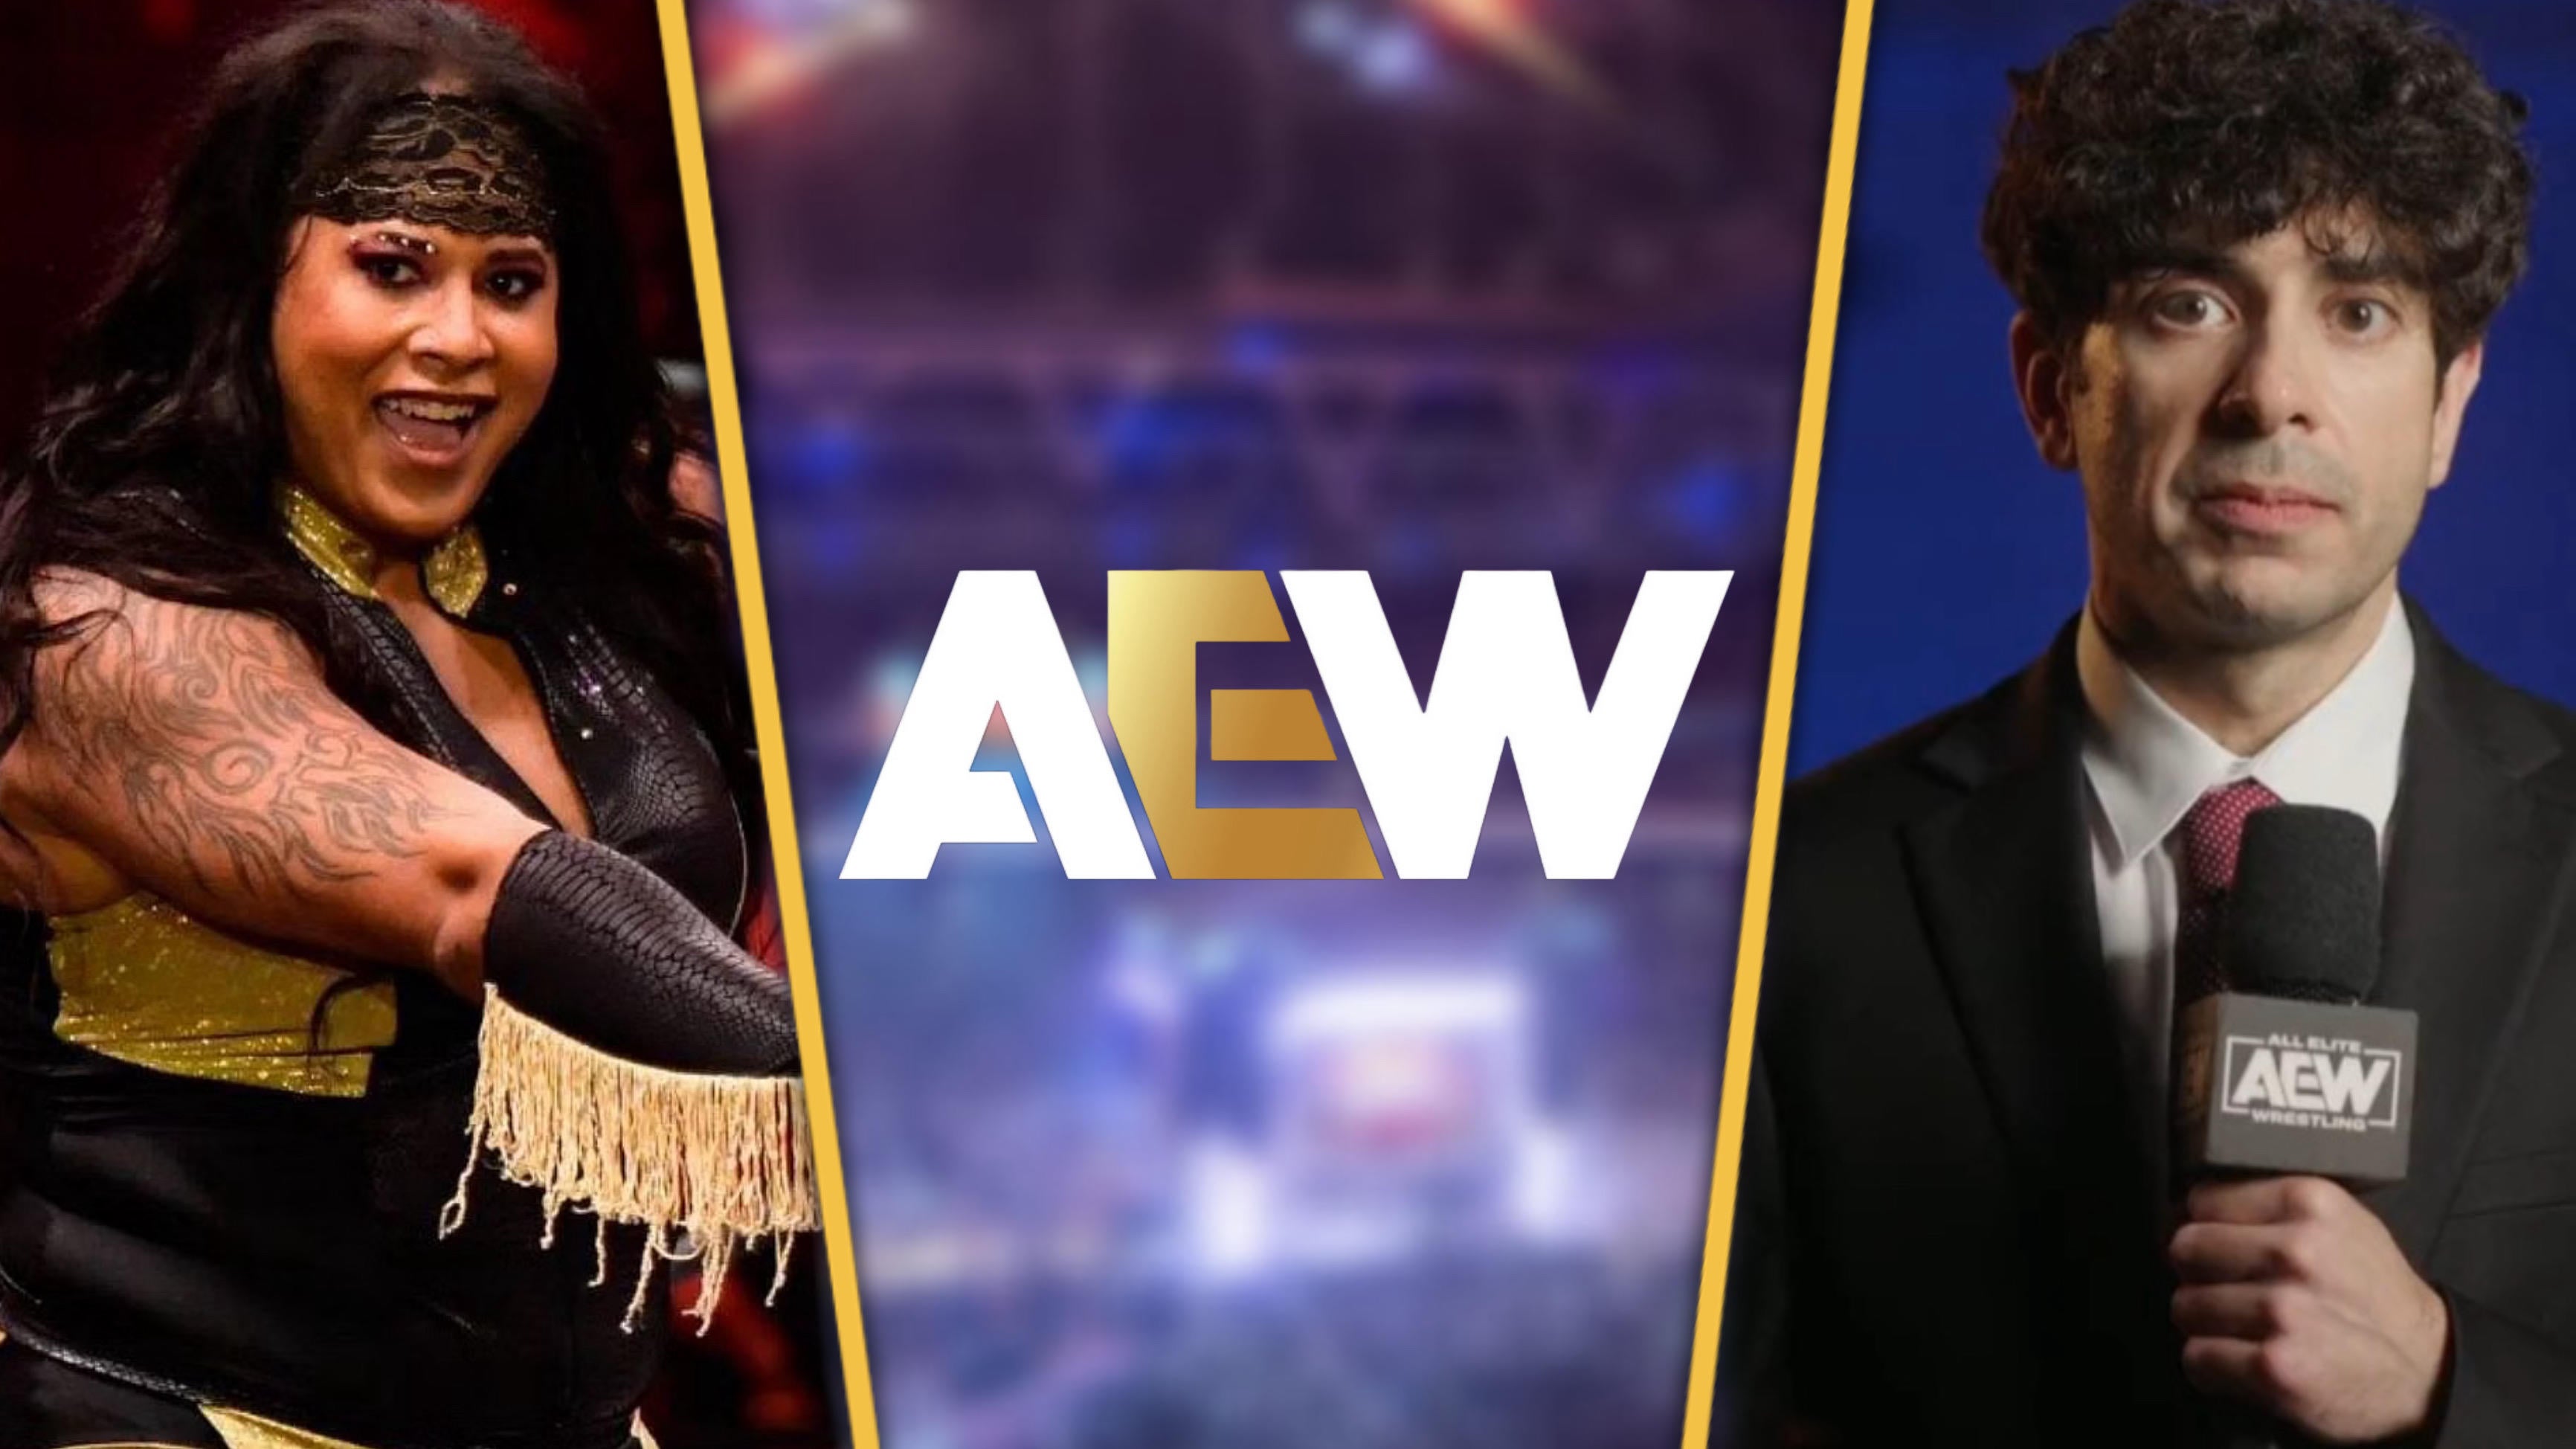 AEW President Tony Khan "Disappointed" by Oklahoma Athletic Commission's Warning About Nyla Rose